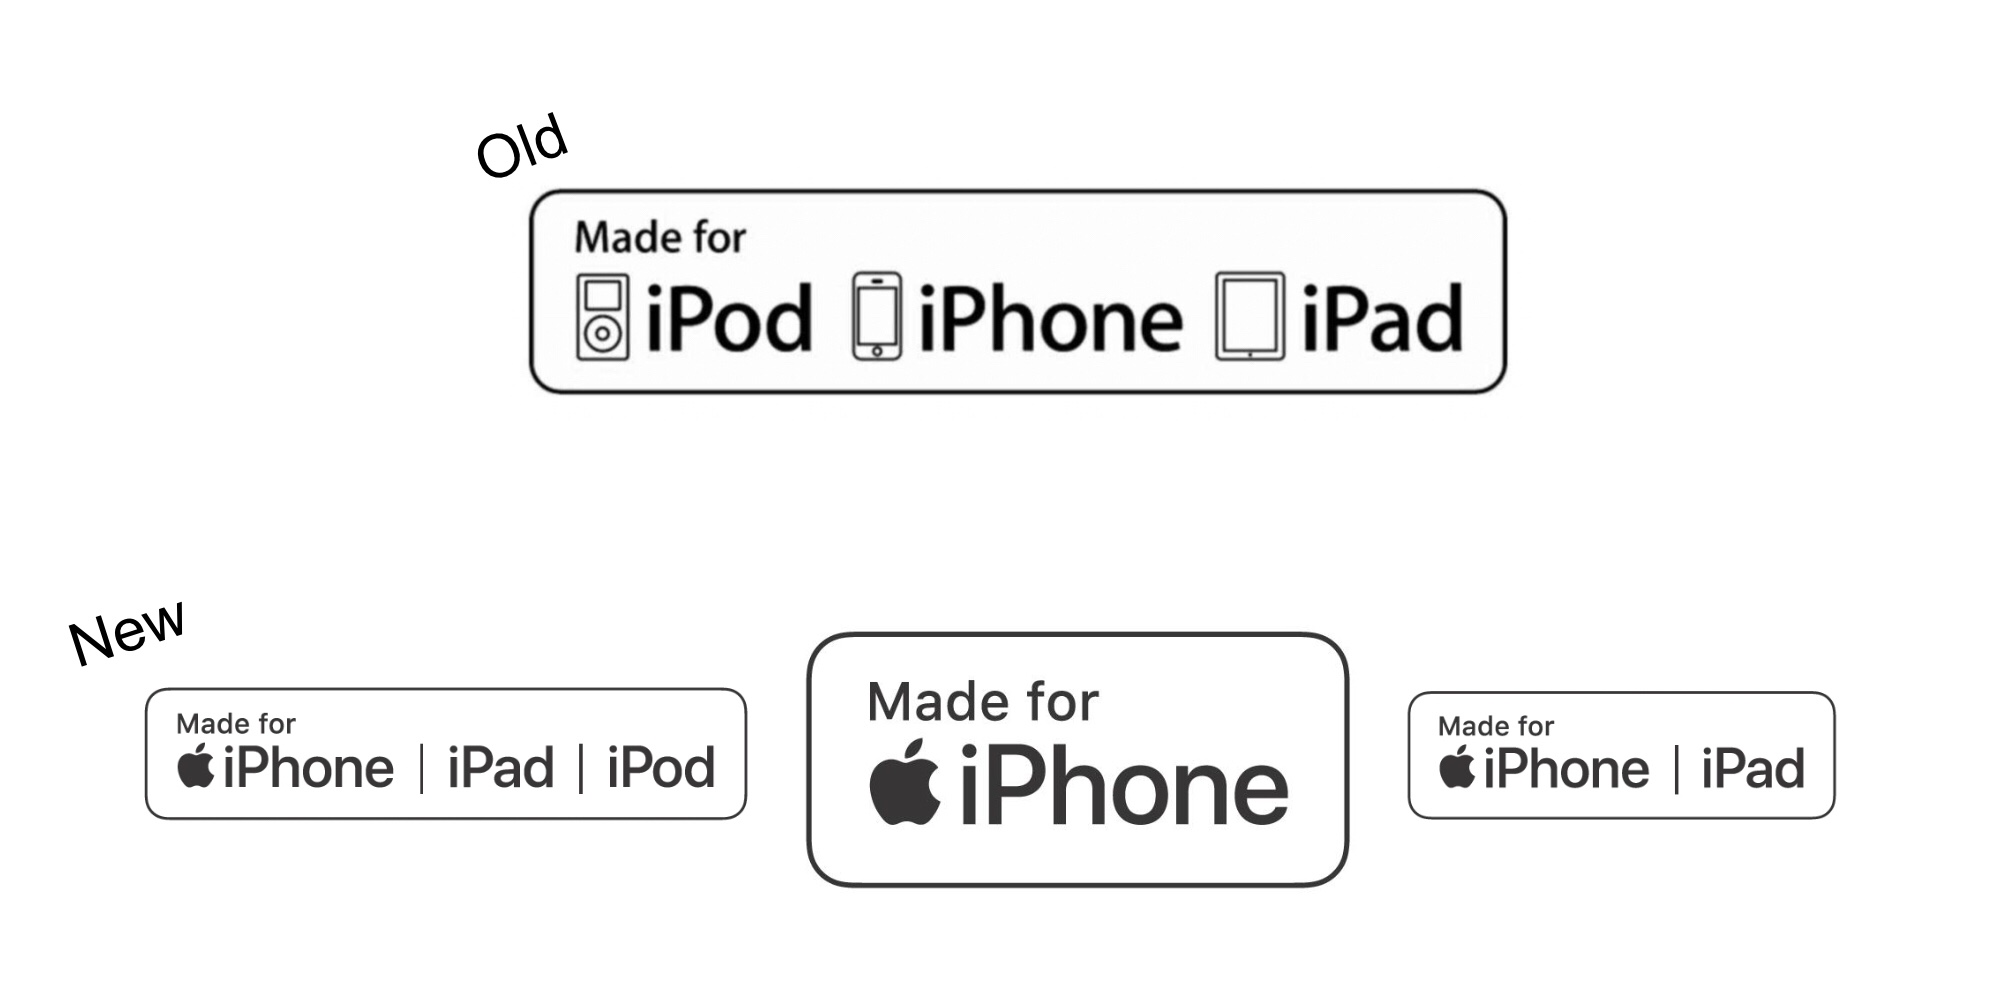 Apple has updated its ‘Made for iPhone’ branding